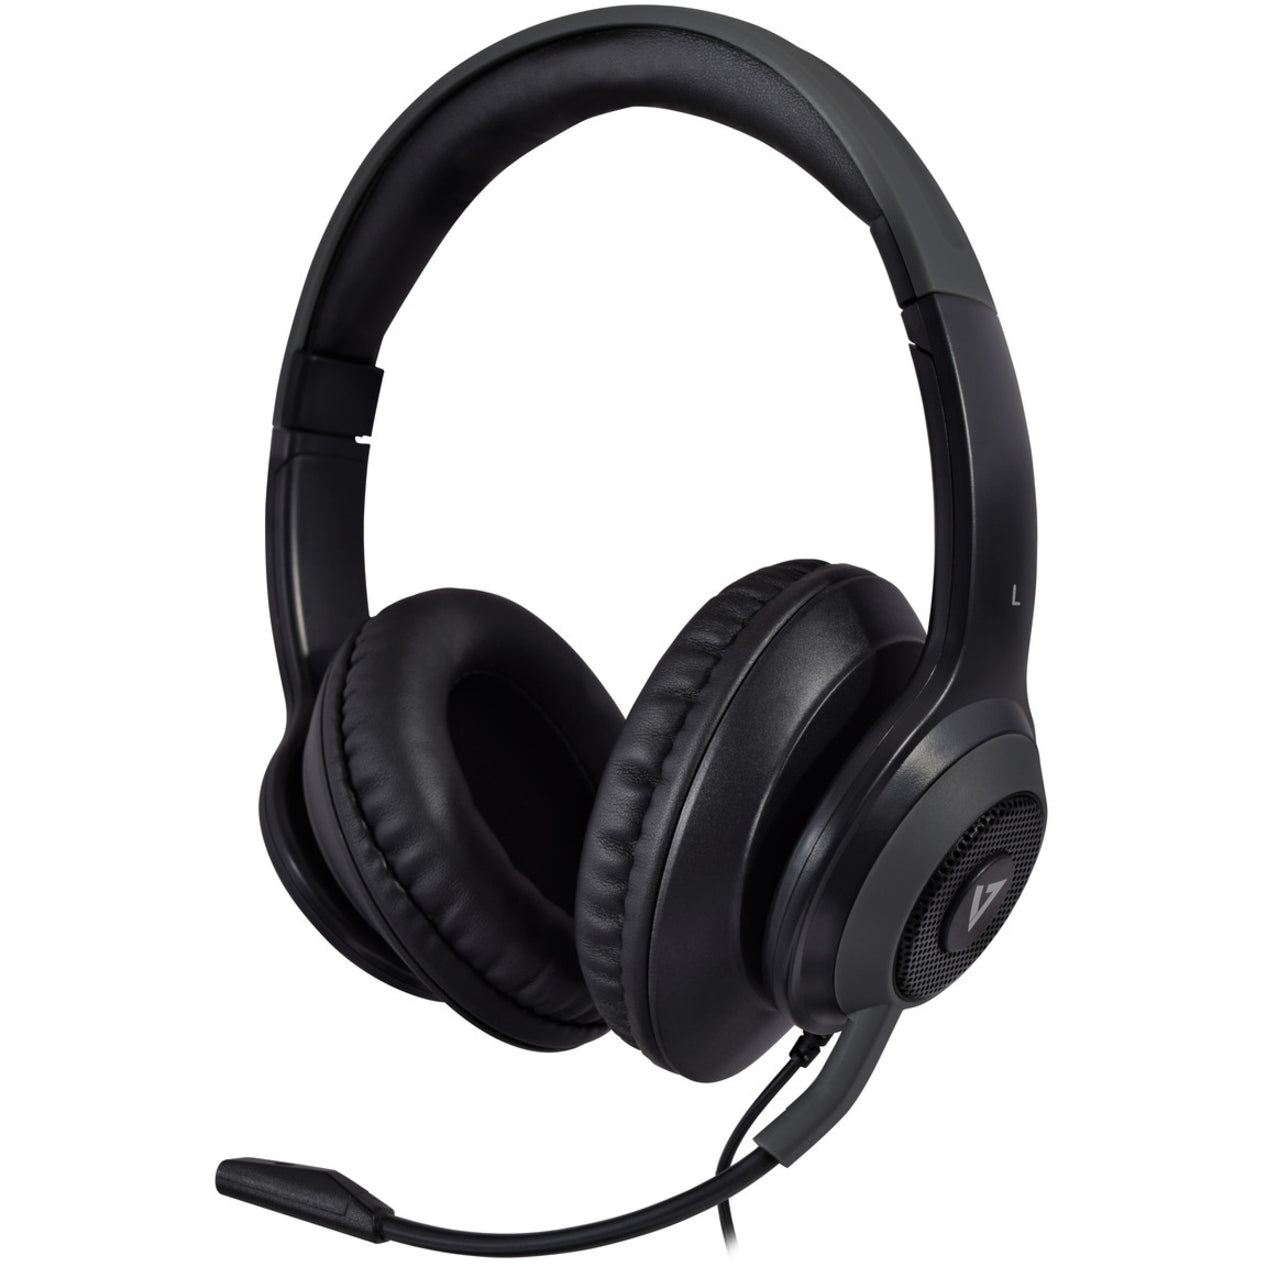 V7 HC701 Premium Over-Ear Stereo Headset with Boom Mic, Noise Cancelling, USB Control Hub